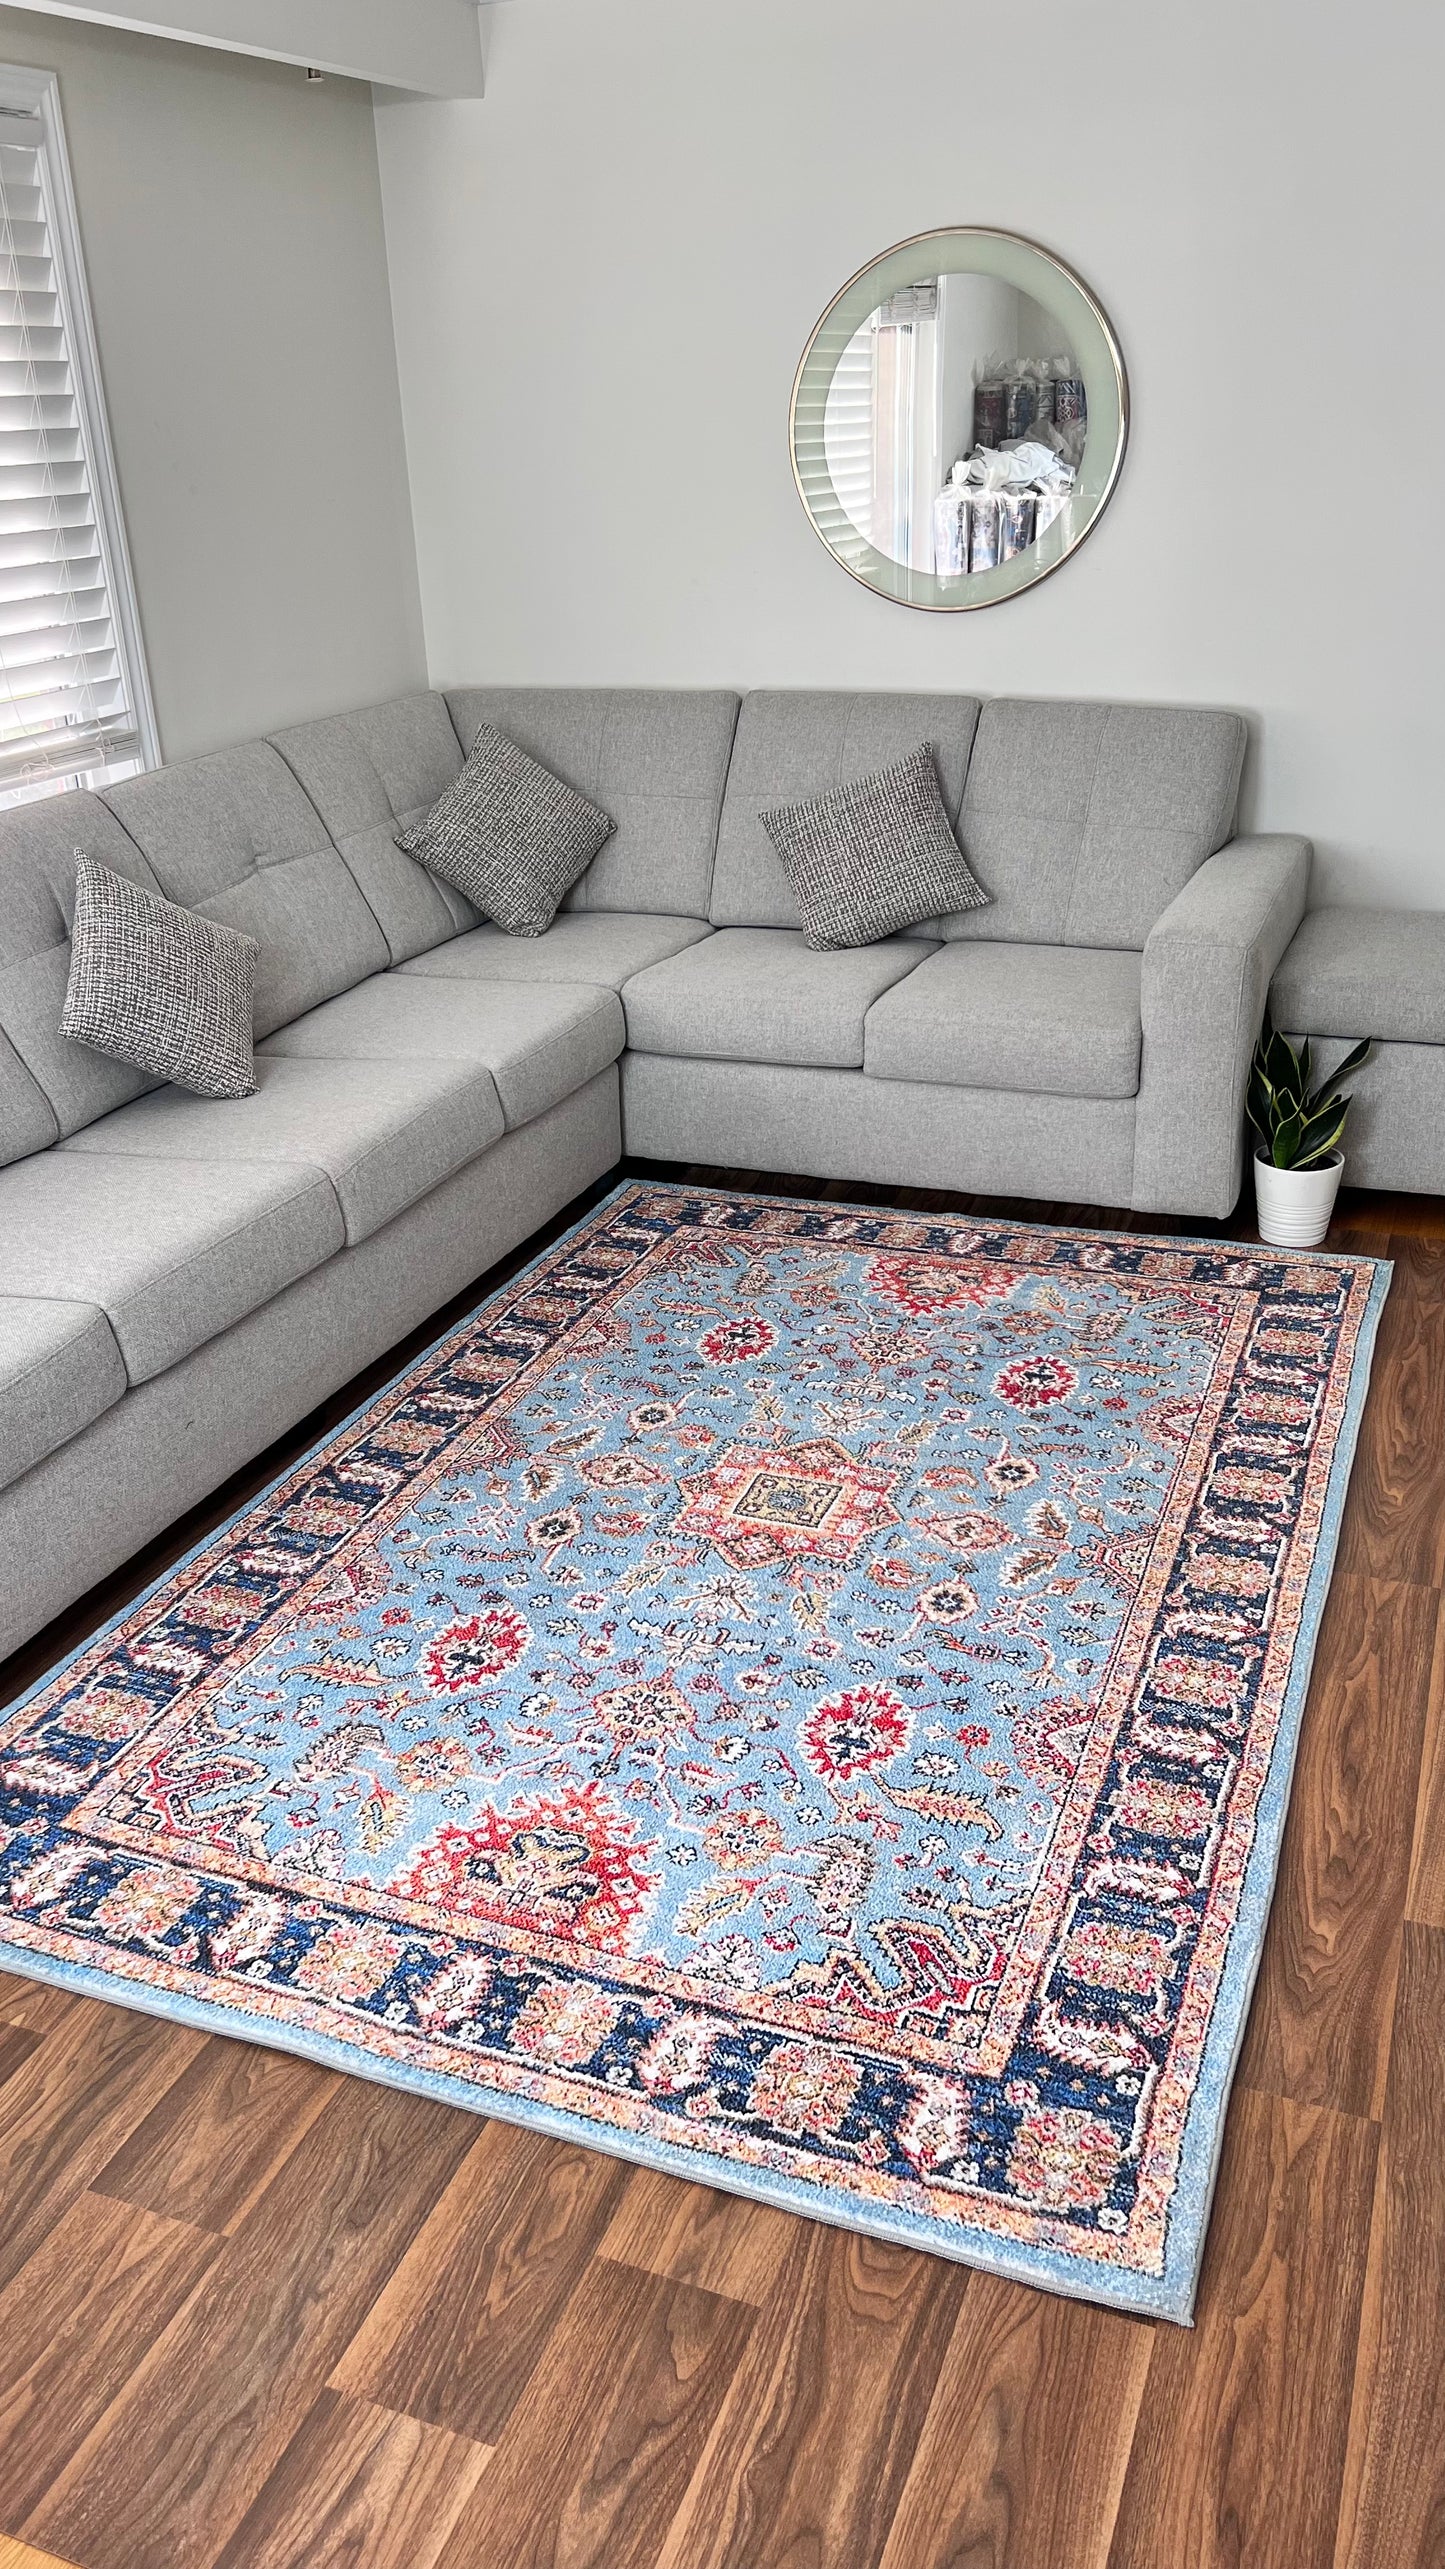 Luxury Woven: Persian Rugs with a Contemporary Twist